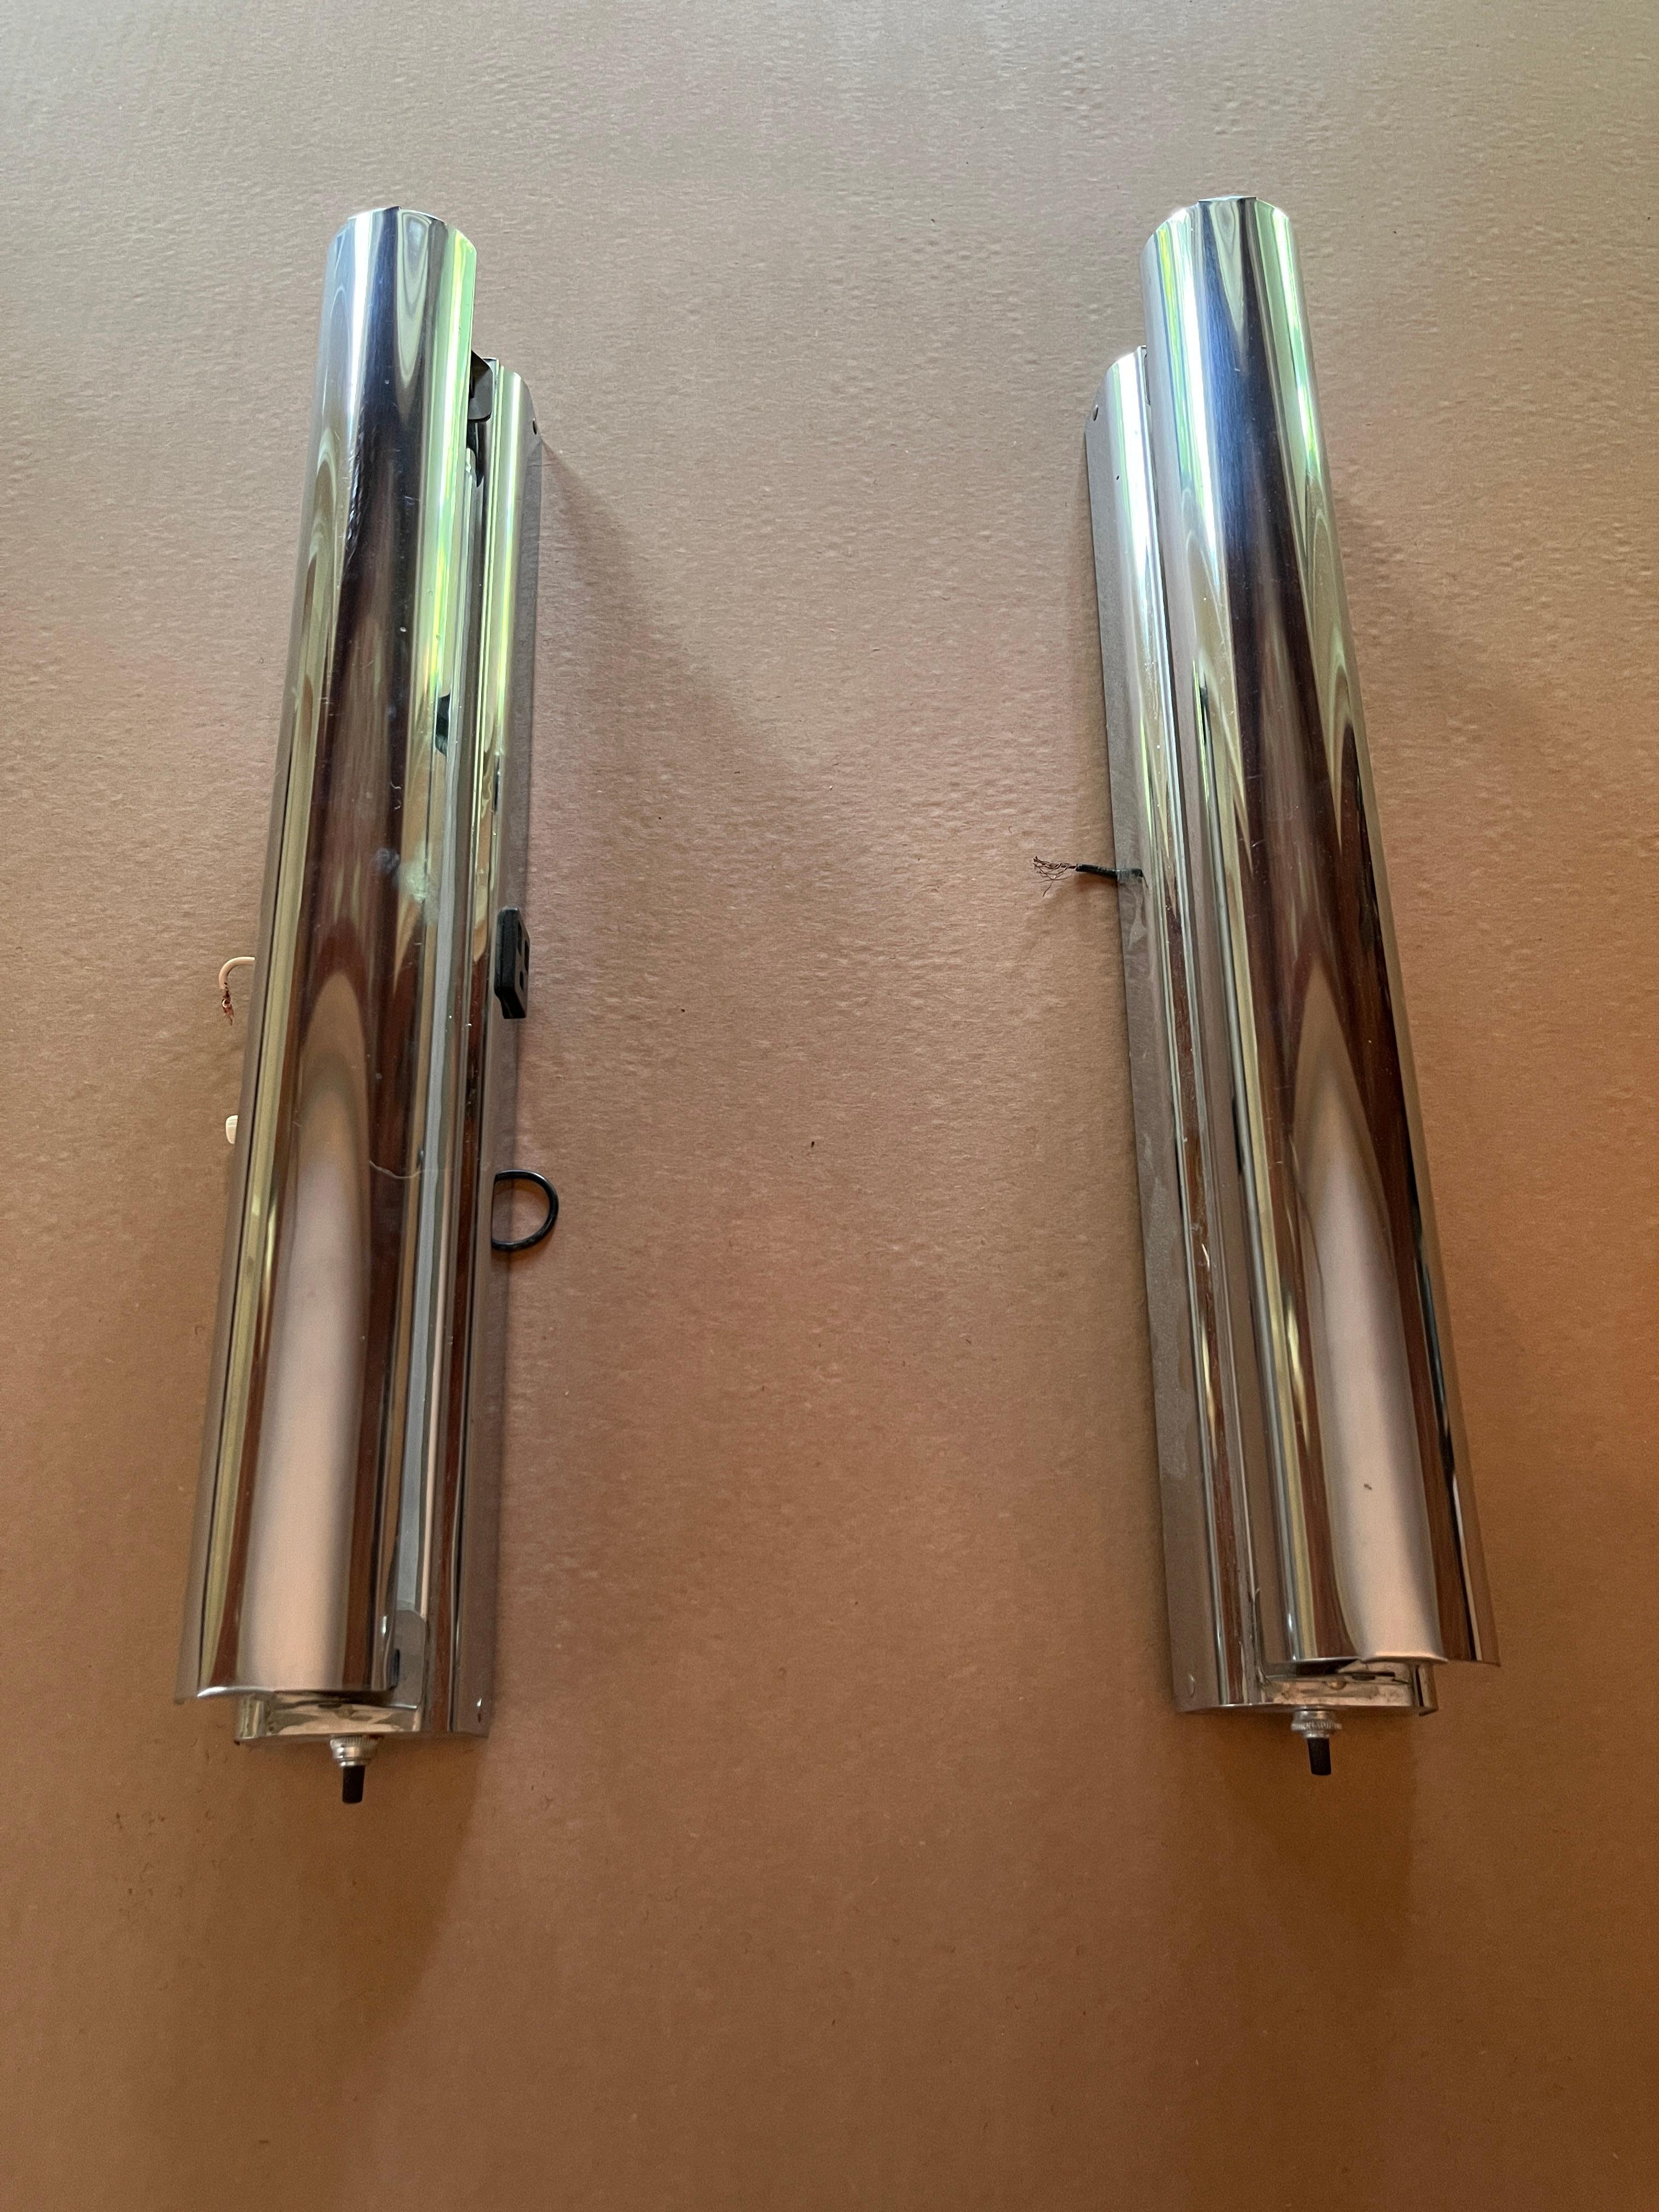 Mid-Century Modern bathroom florescent bathroom fixture with unusual chrome shades. Both fully functional when tested with 18